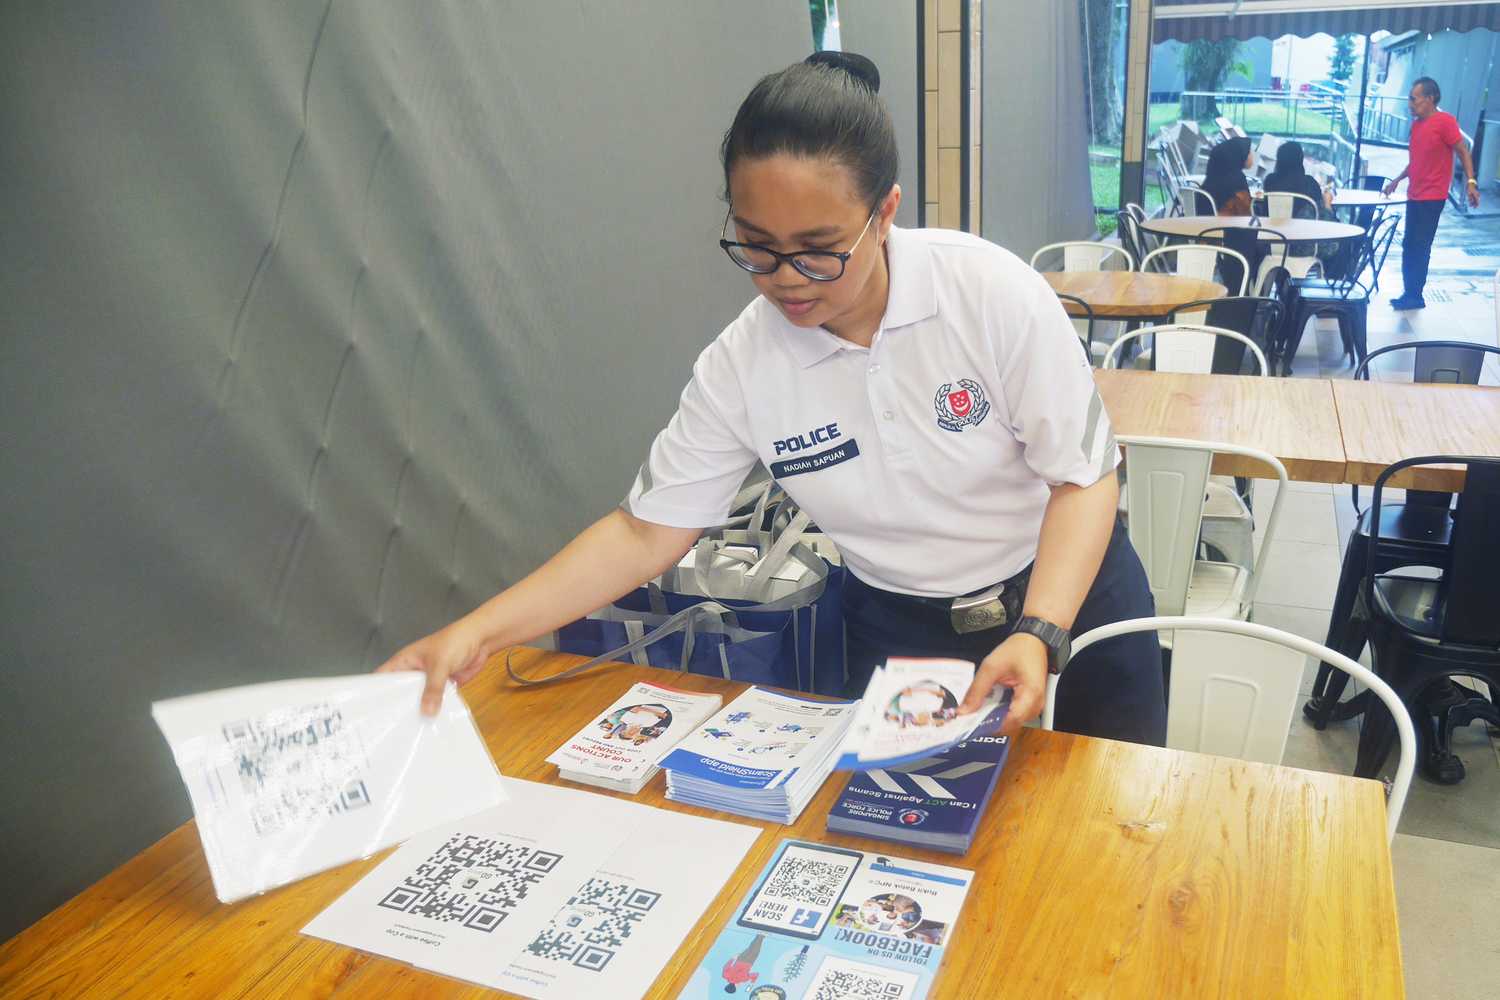 An officer preparing for the Coffee with a Cop event by arranging pamphlets.